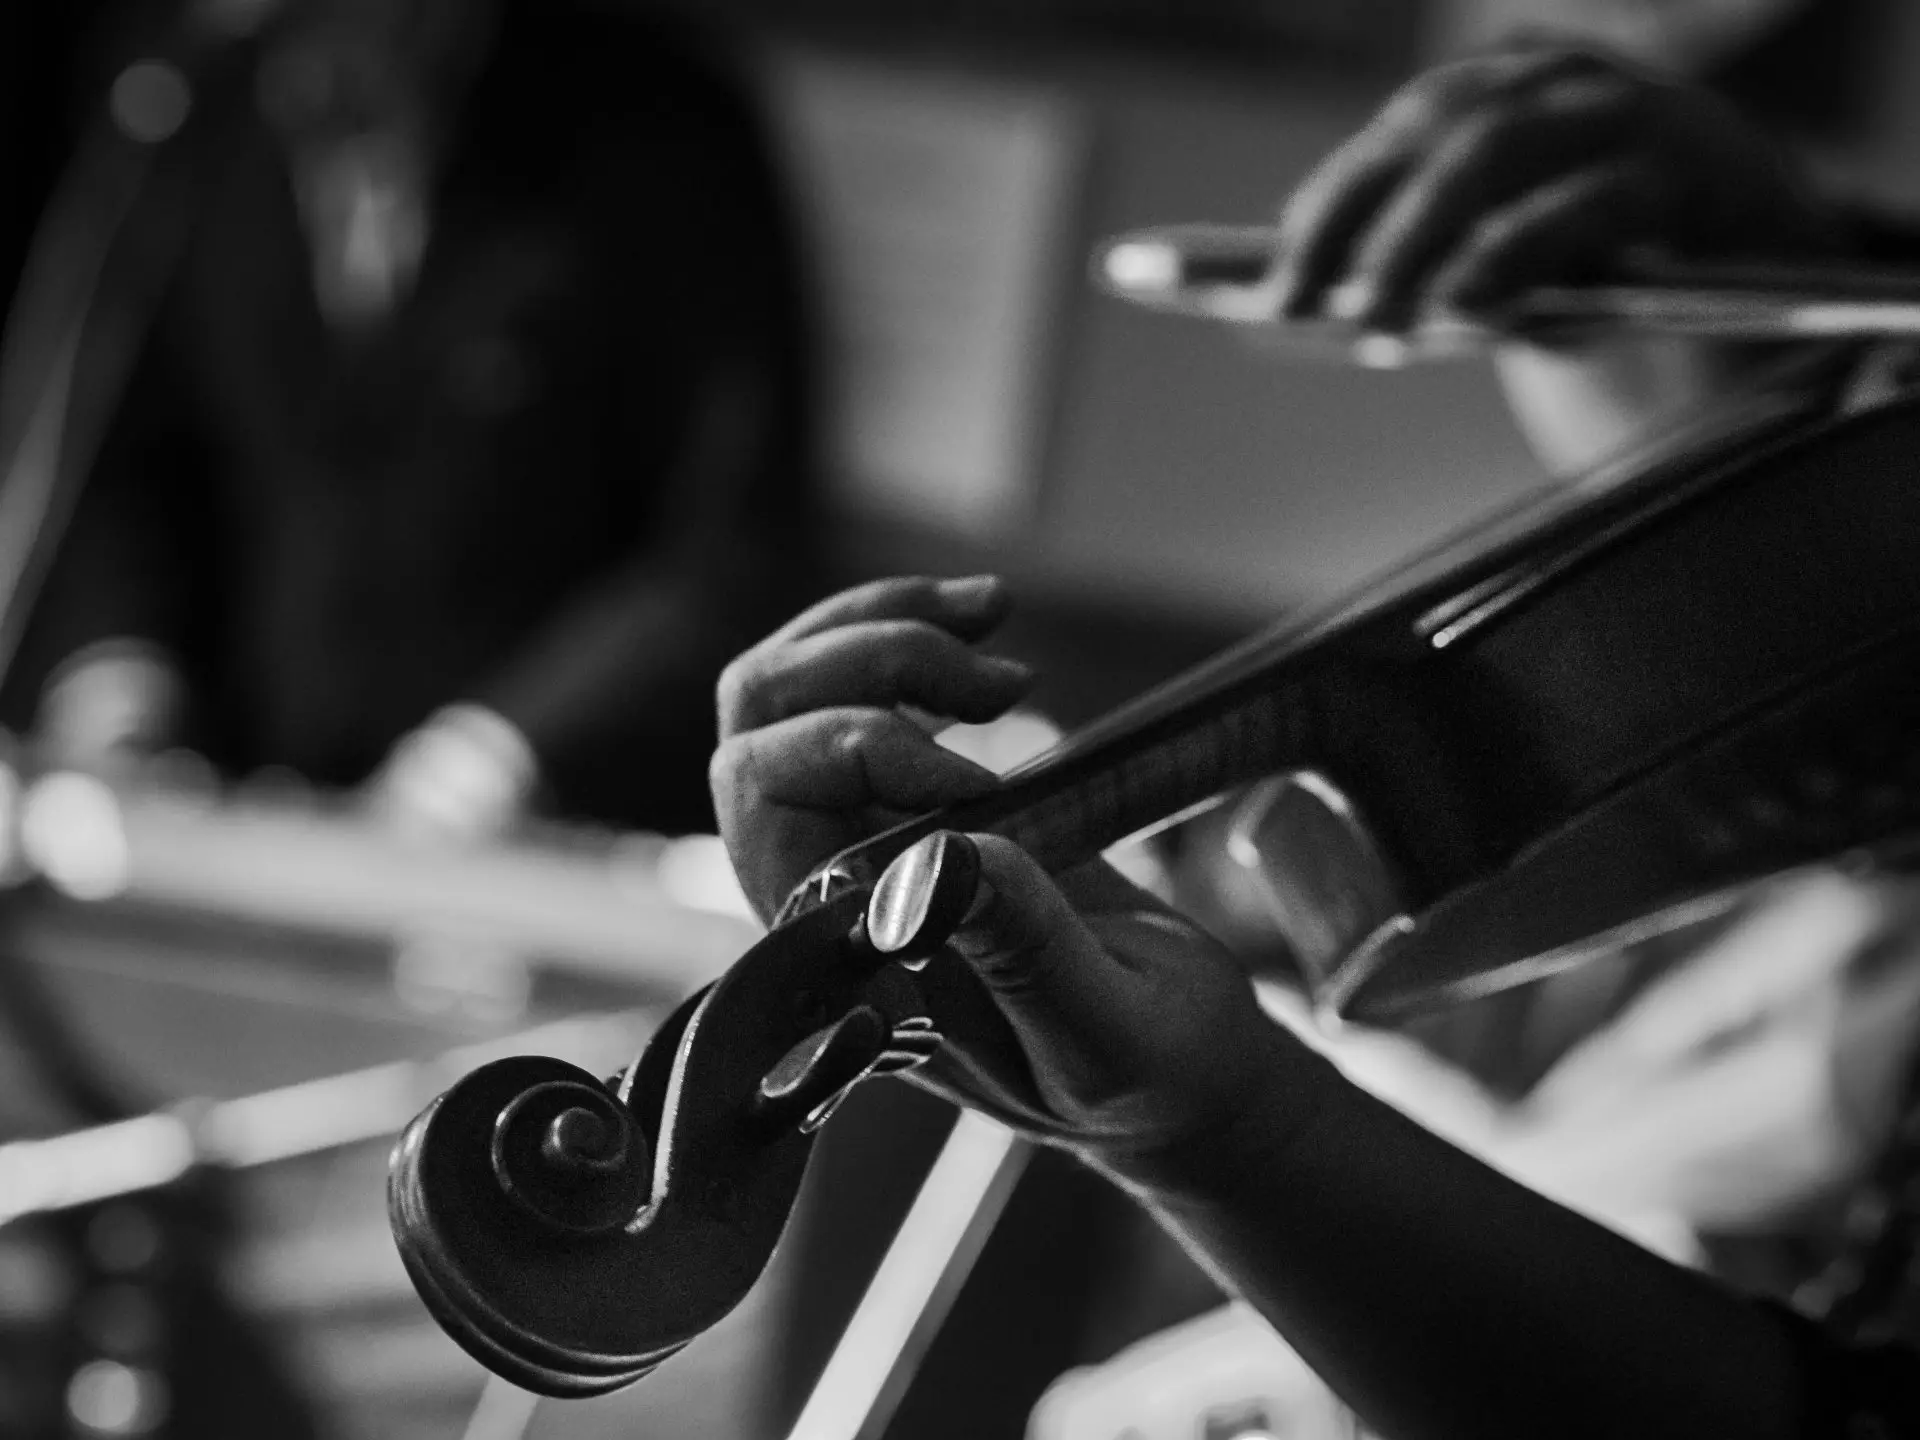 black and white close up image of a woman playing the violin, with a man playing piano in the background